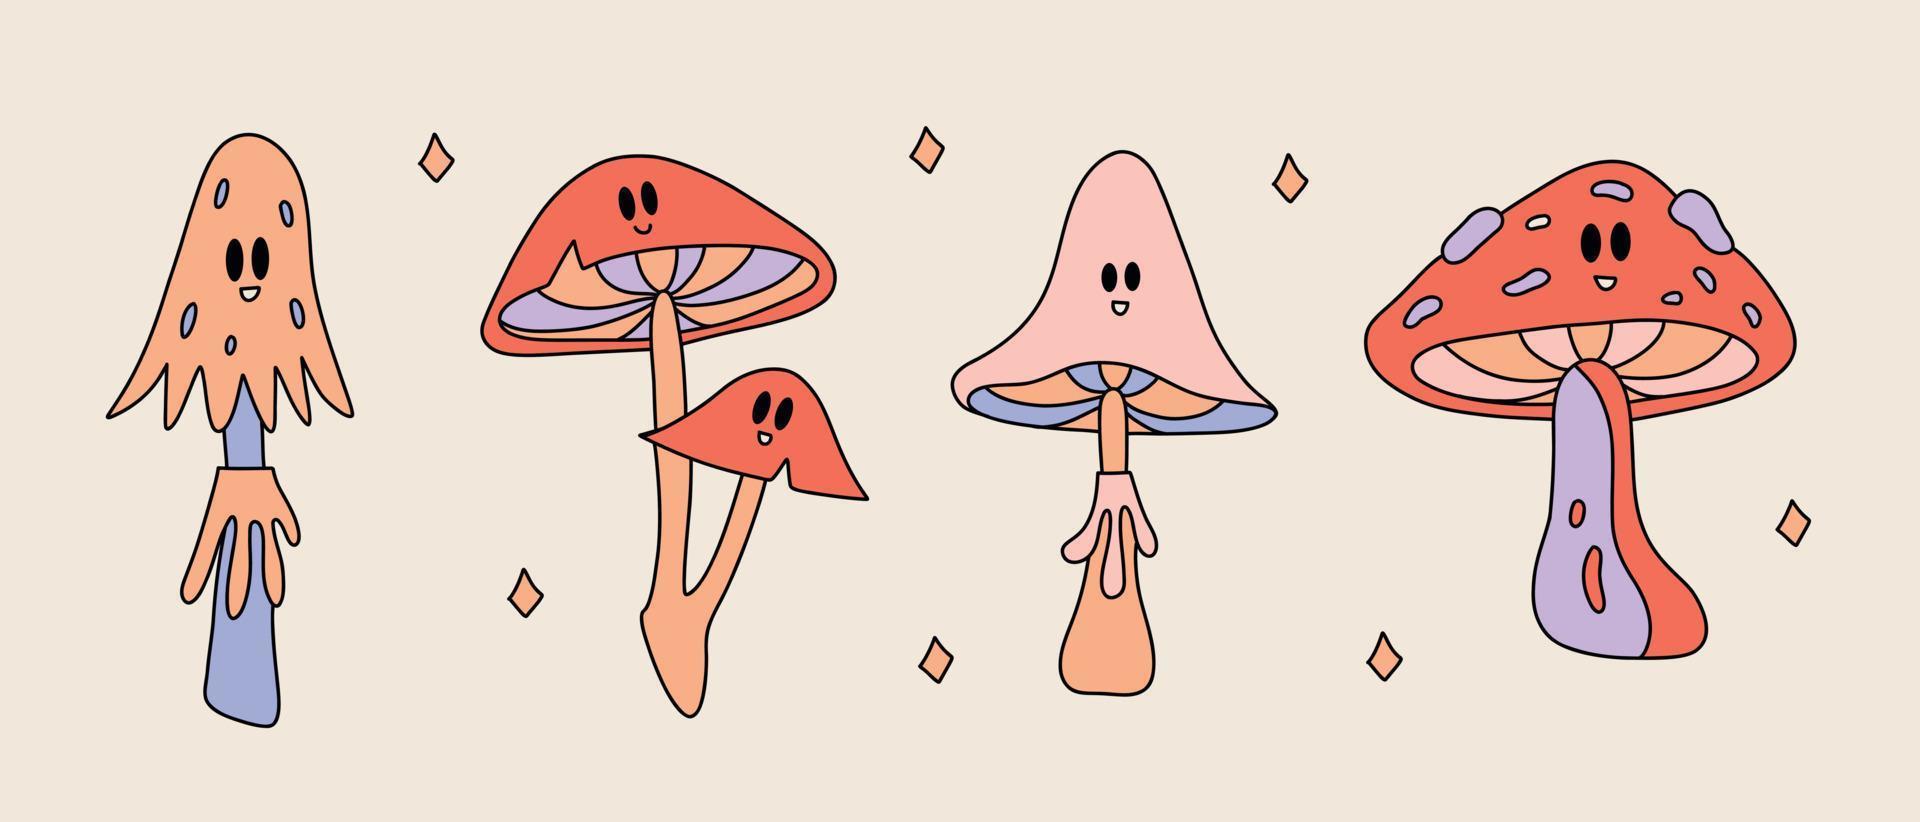 Funny retro Stickers of Psychedelic Groovy aesthetic. Vintage cartoon set of different mushrooms. Funky 60s - 70s elements vector